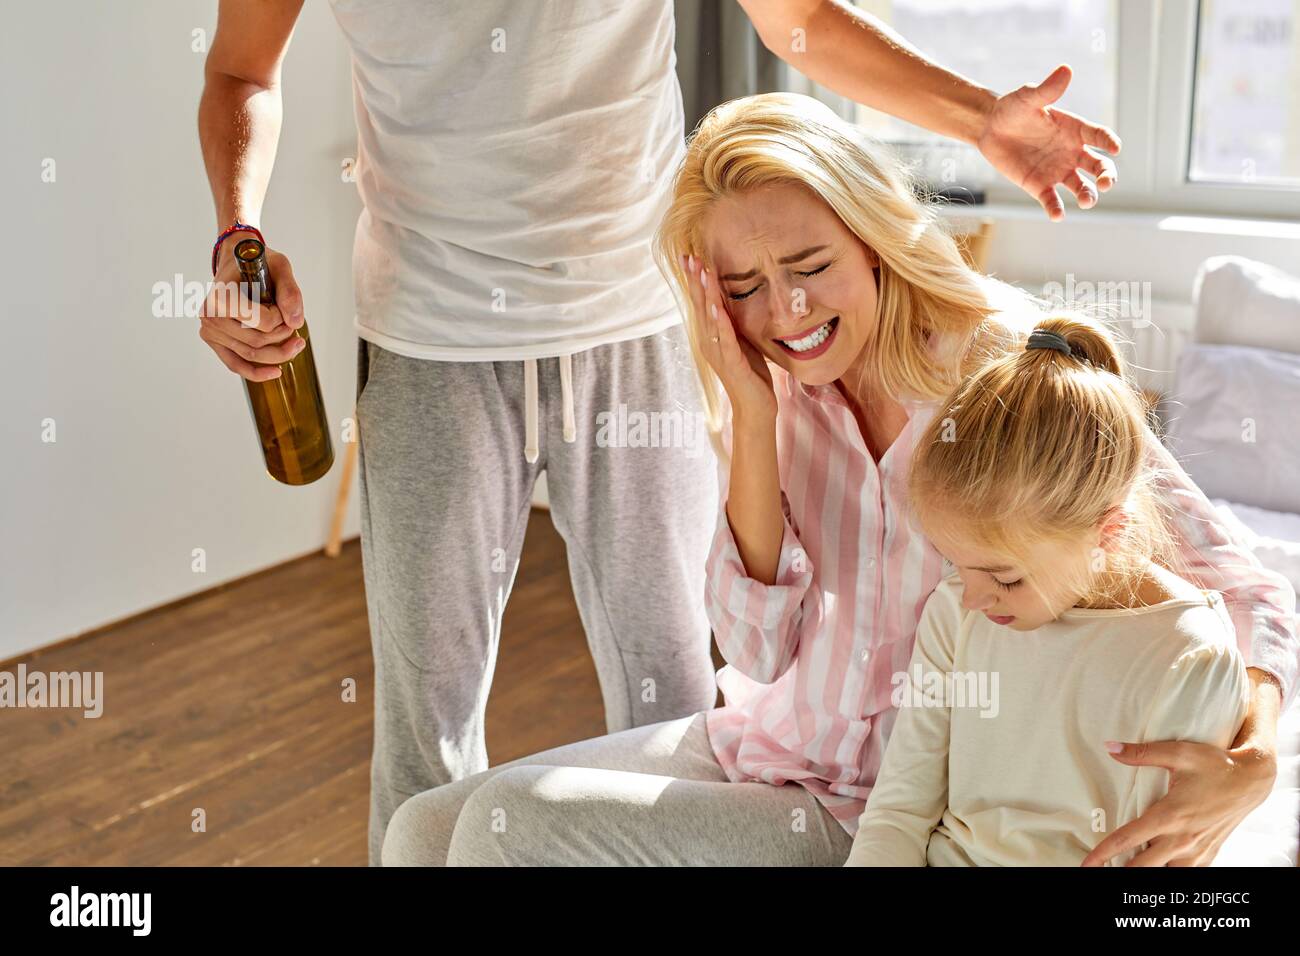 blond woman and child girl sits suffering from cruelty of father, abusive relationships concept, man is screaming and punishing members of family Stock Photo